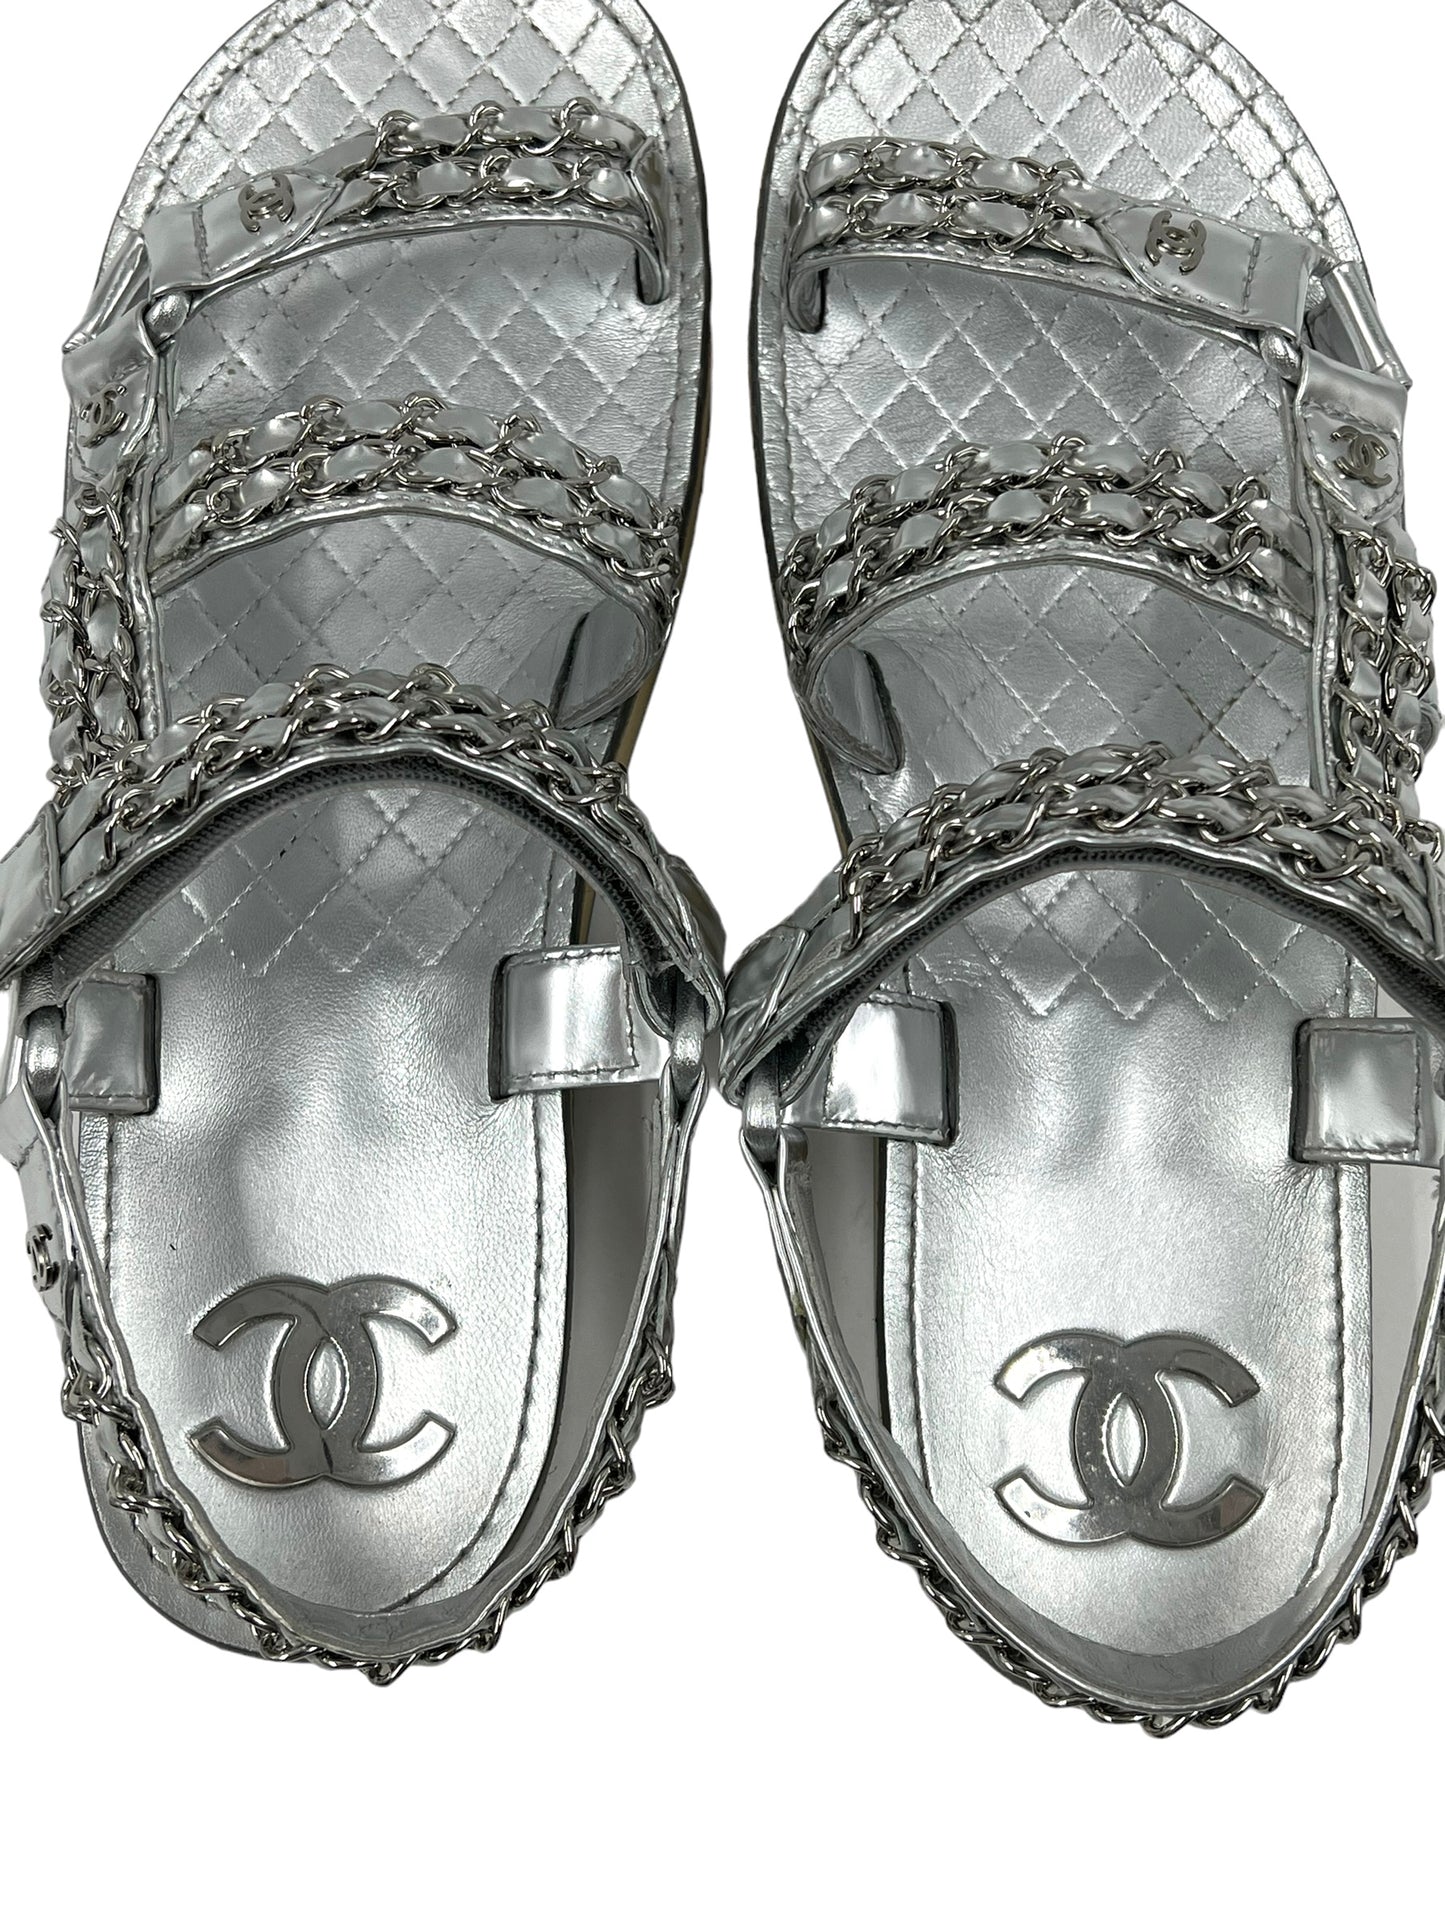 Chanel Size 39.5 Silver Leather Dad Chain Sandals